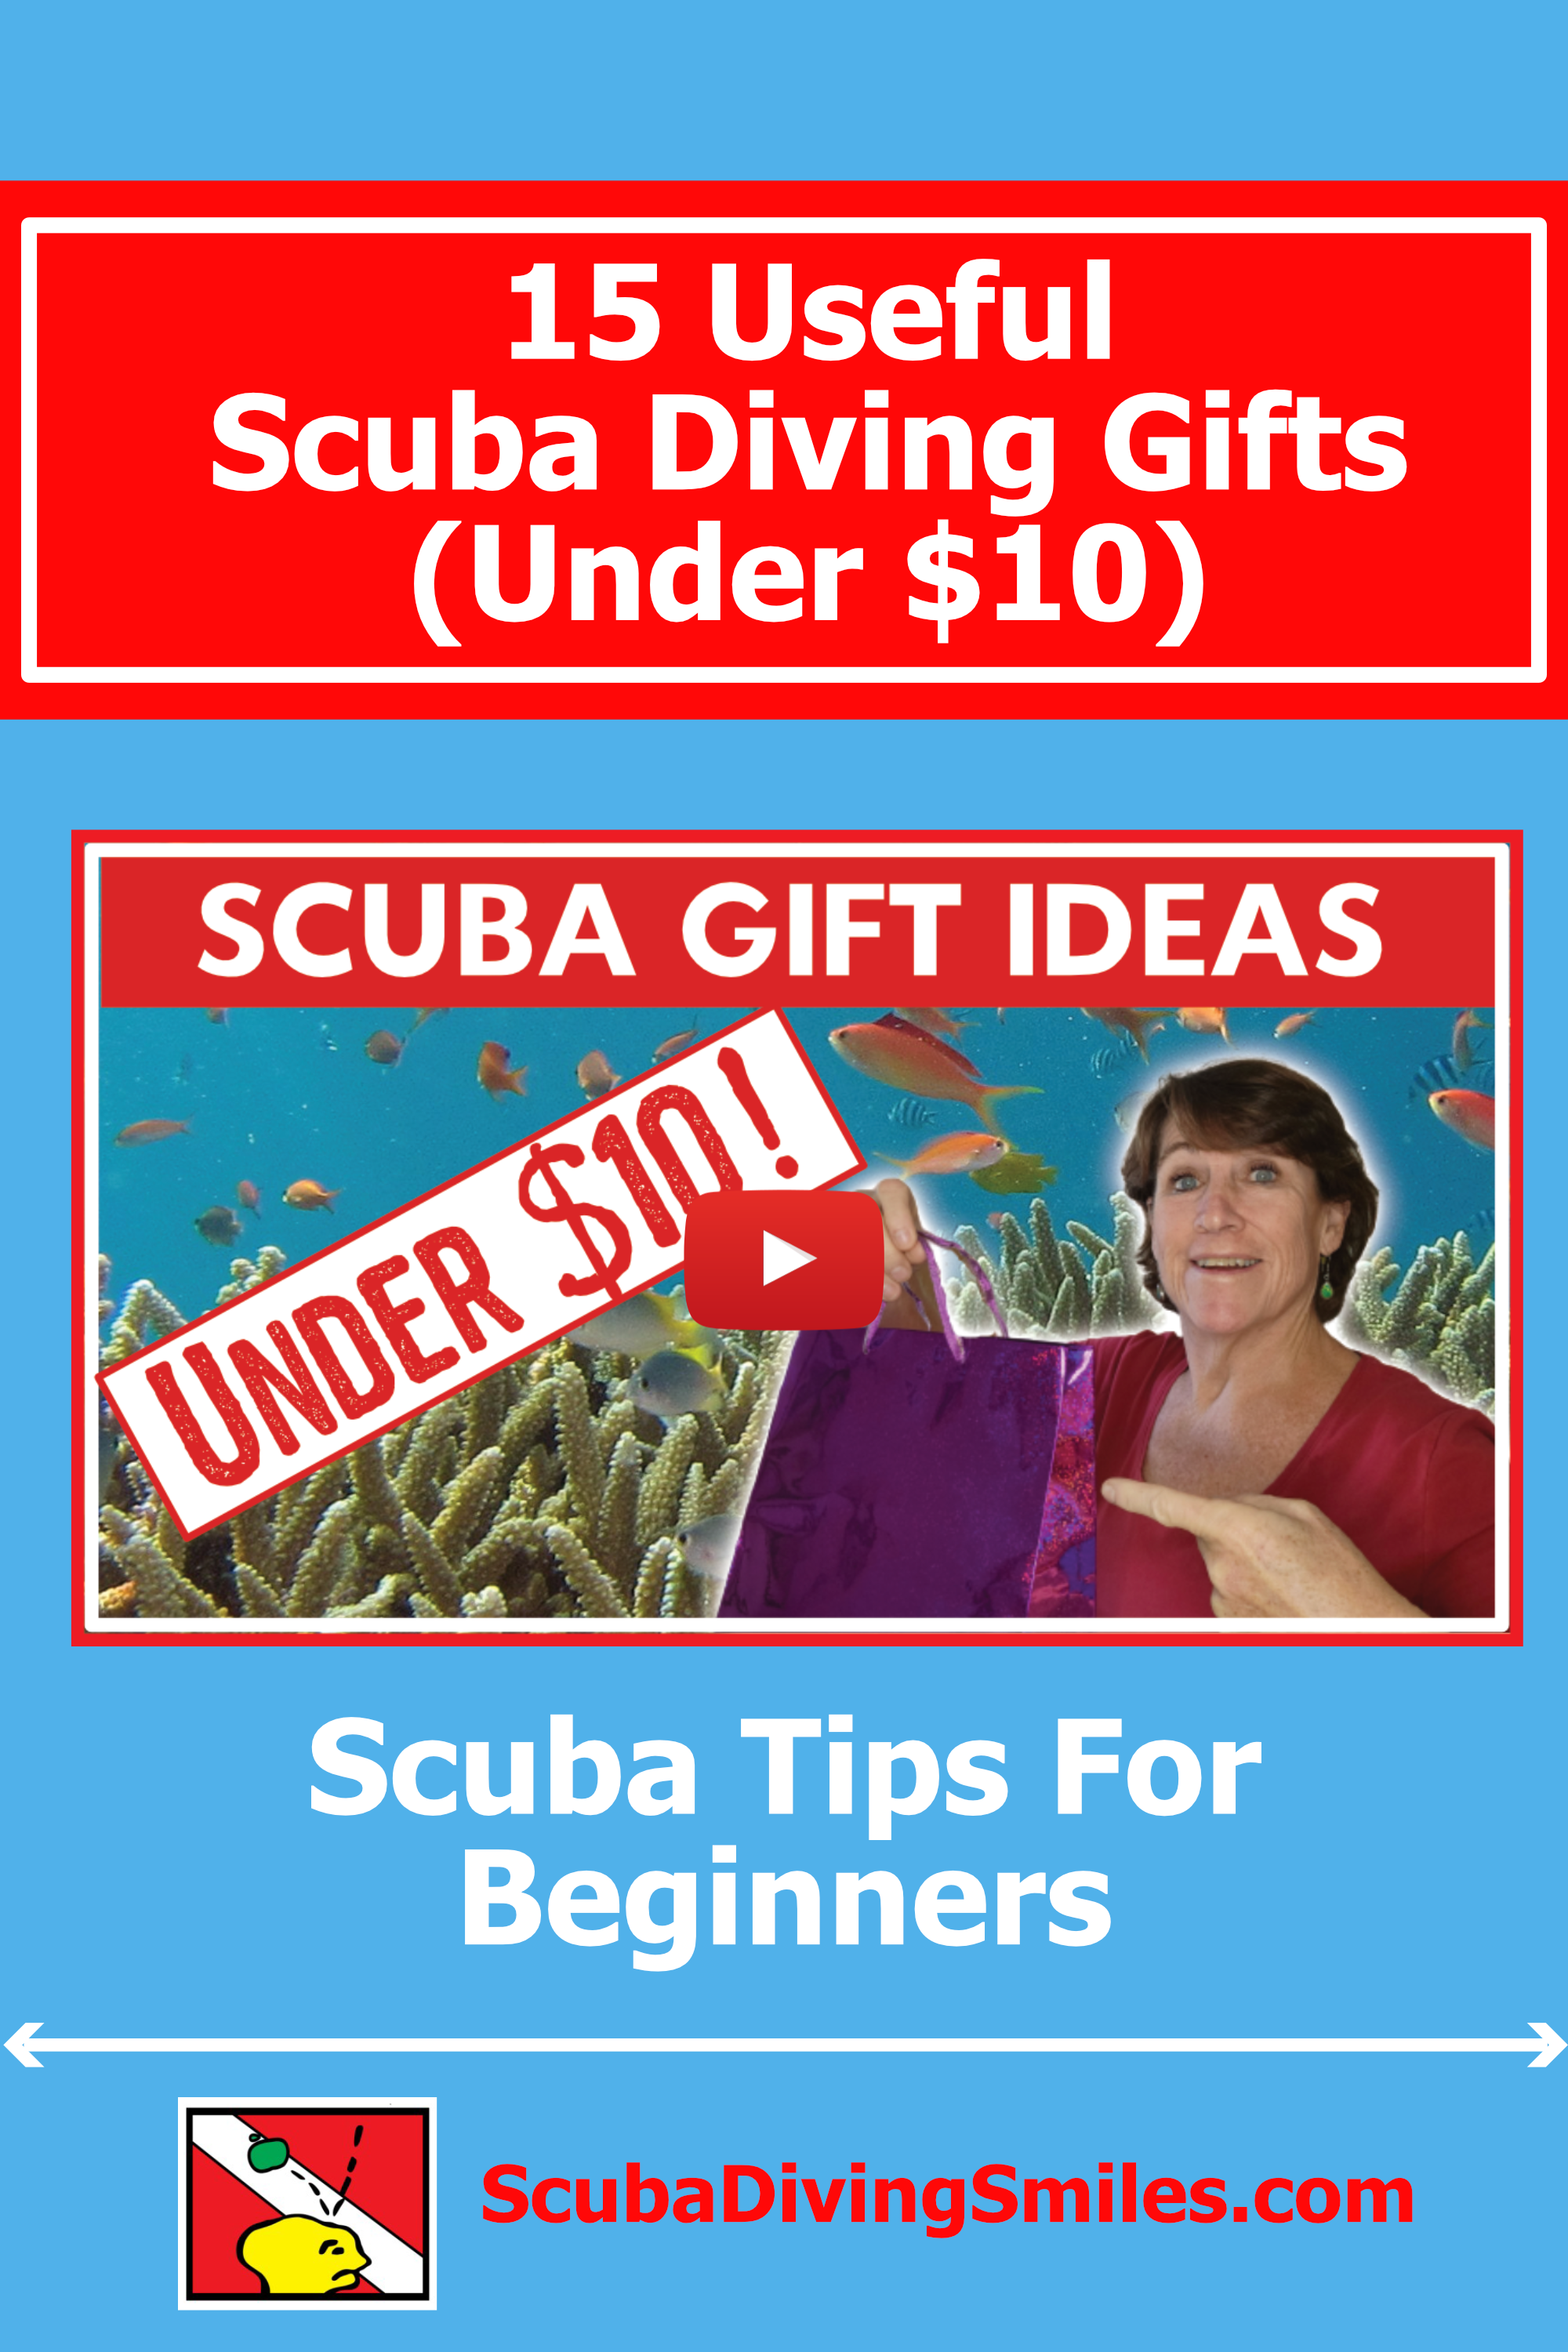 Useful Gift Ideas For Scuba Divers Under $10